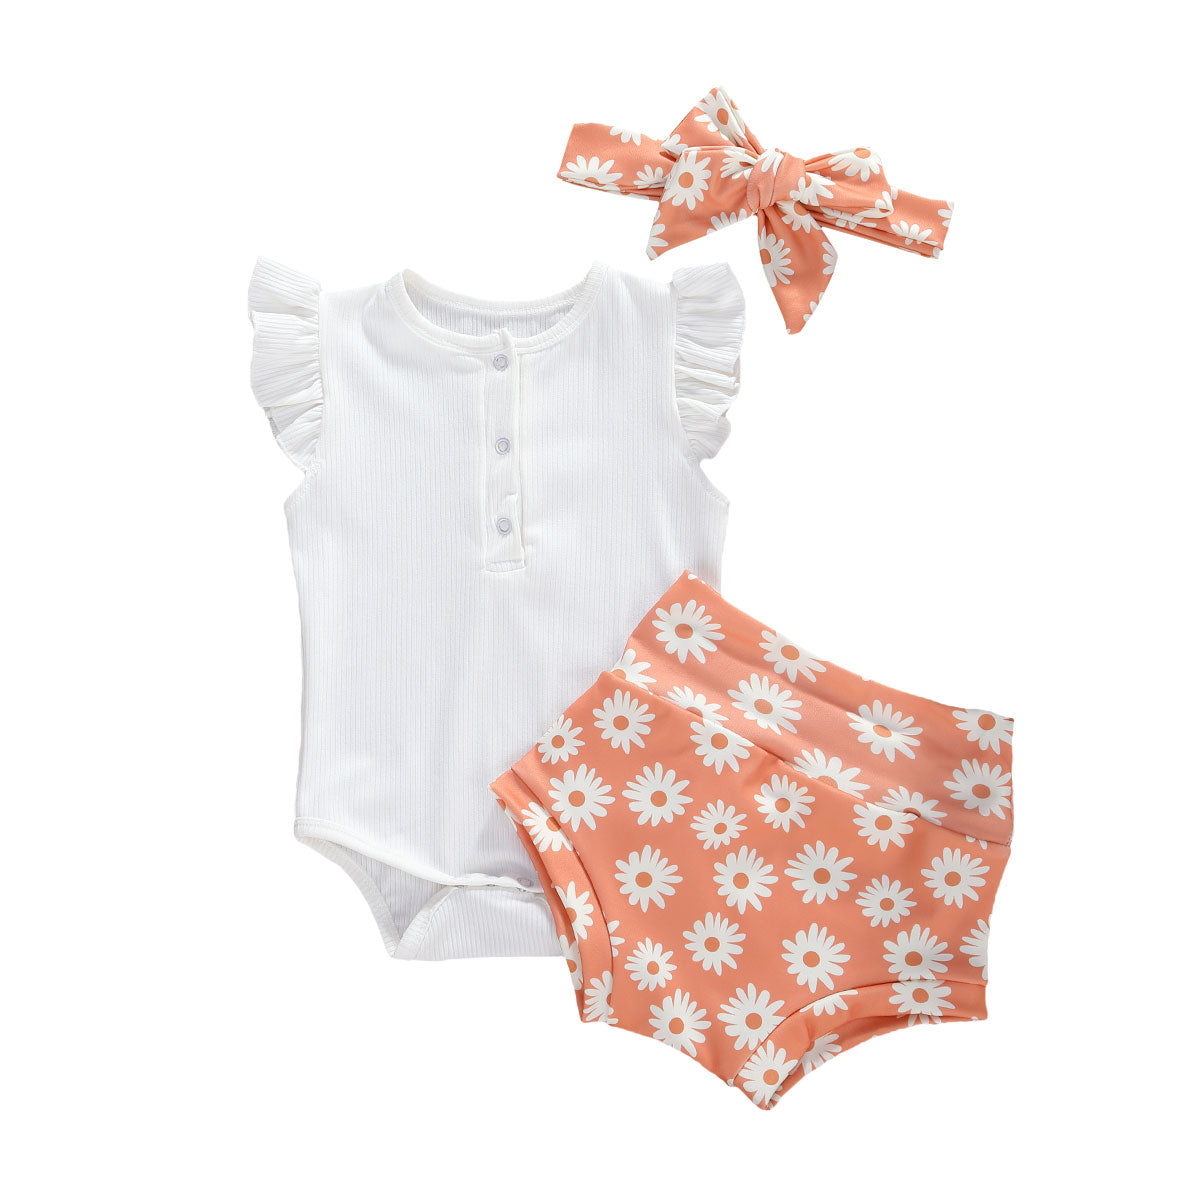 Infant And Toddler Suits Baby Girl Dark Button White Top Printed Shorts Suit Thre-piece Set - BabbeZz